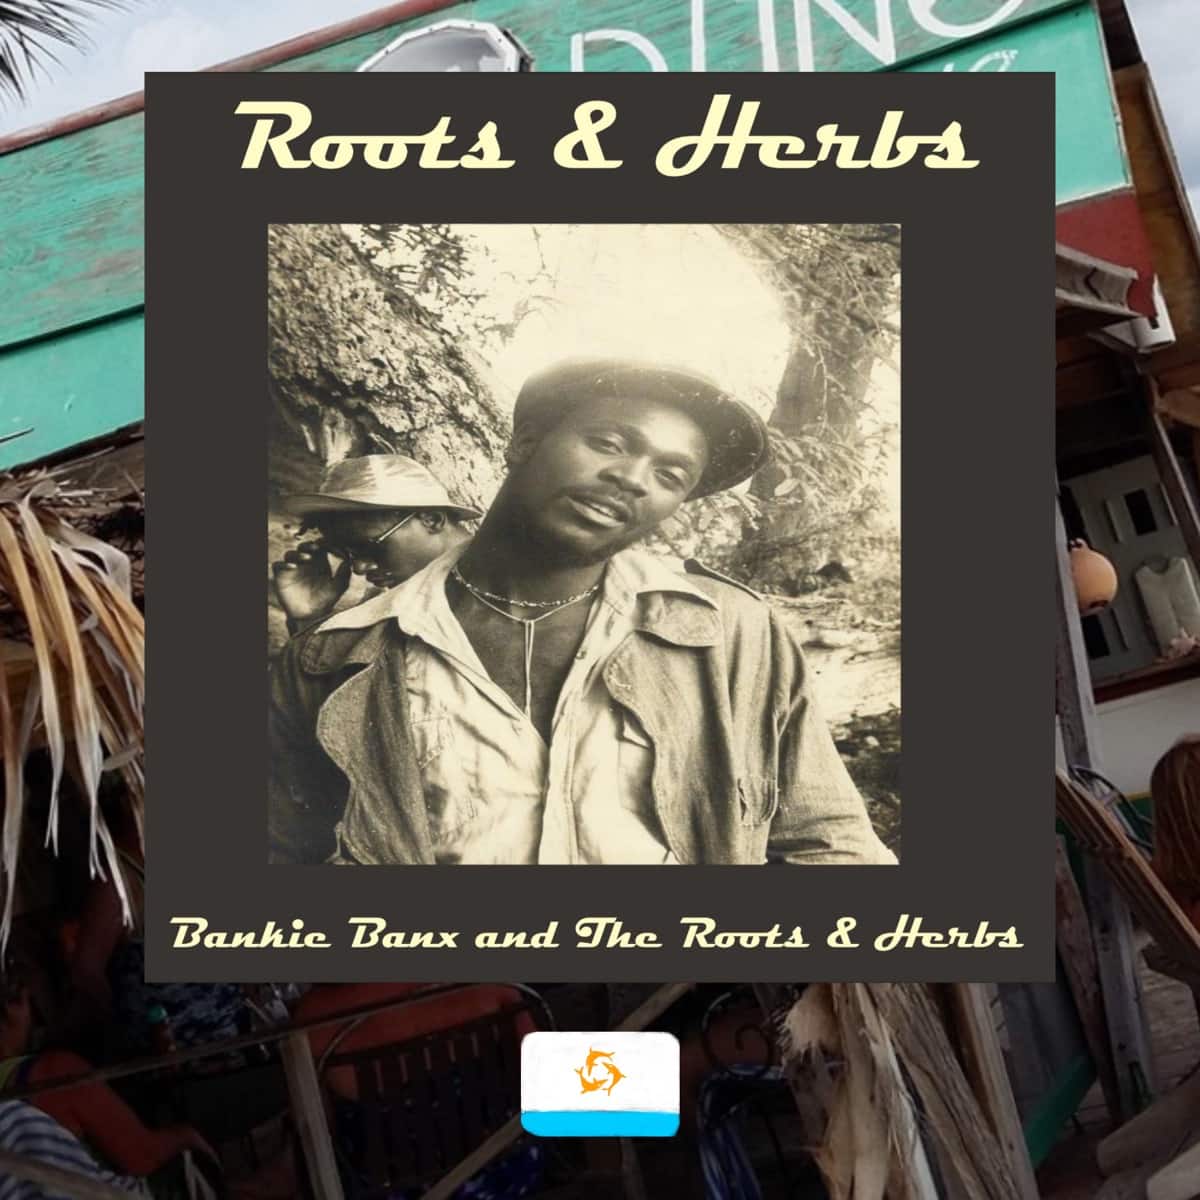 Bankie Banx & The Roots and Herbs, Roots and Herbs, album review